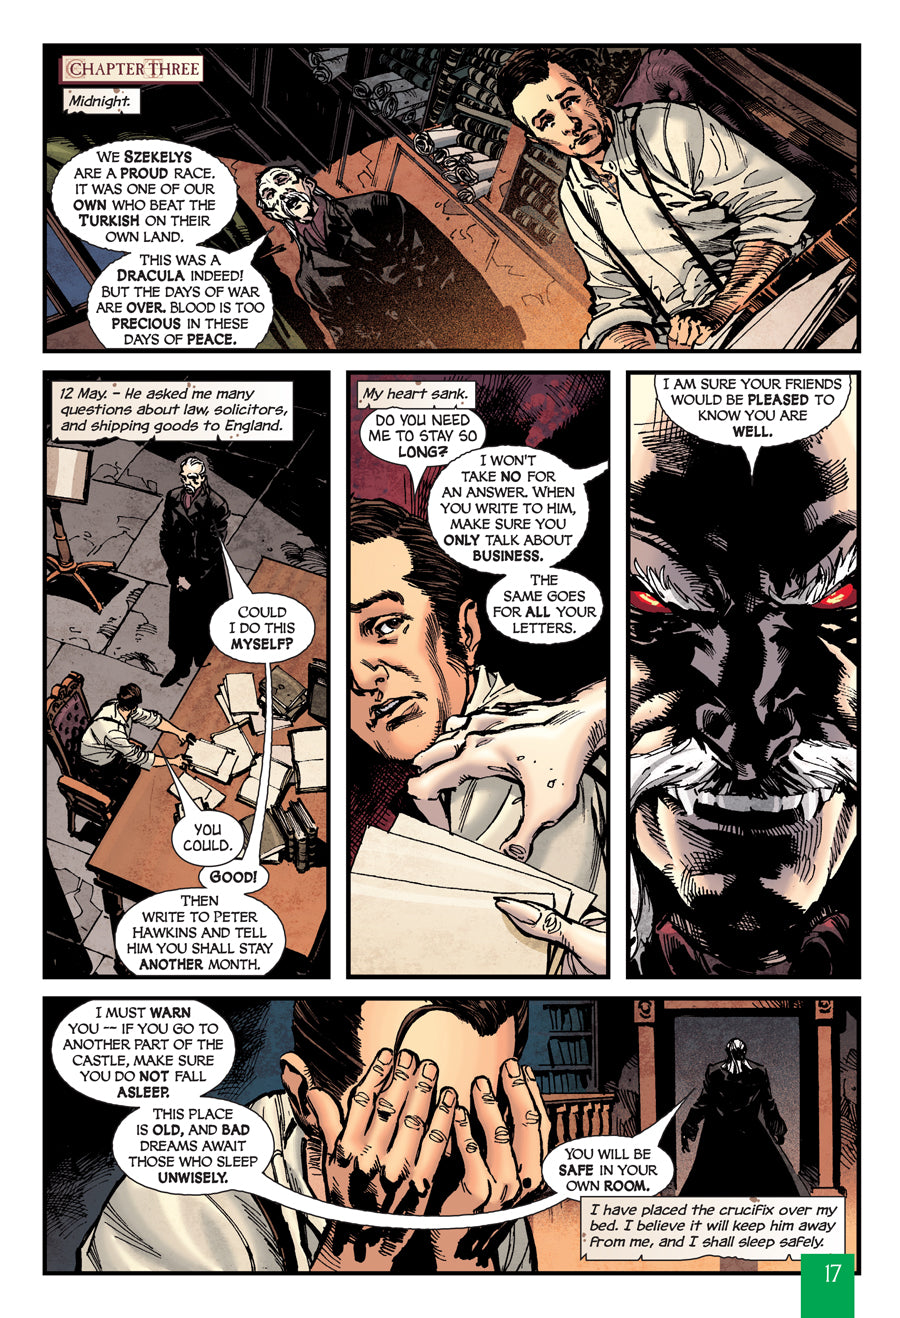 A sample Quick Text interior page from Dracula.